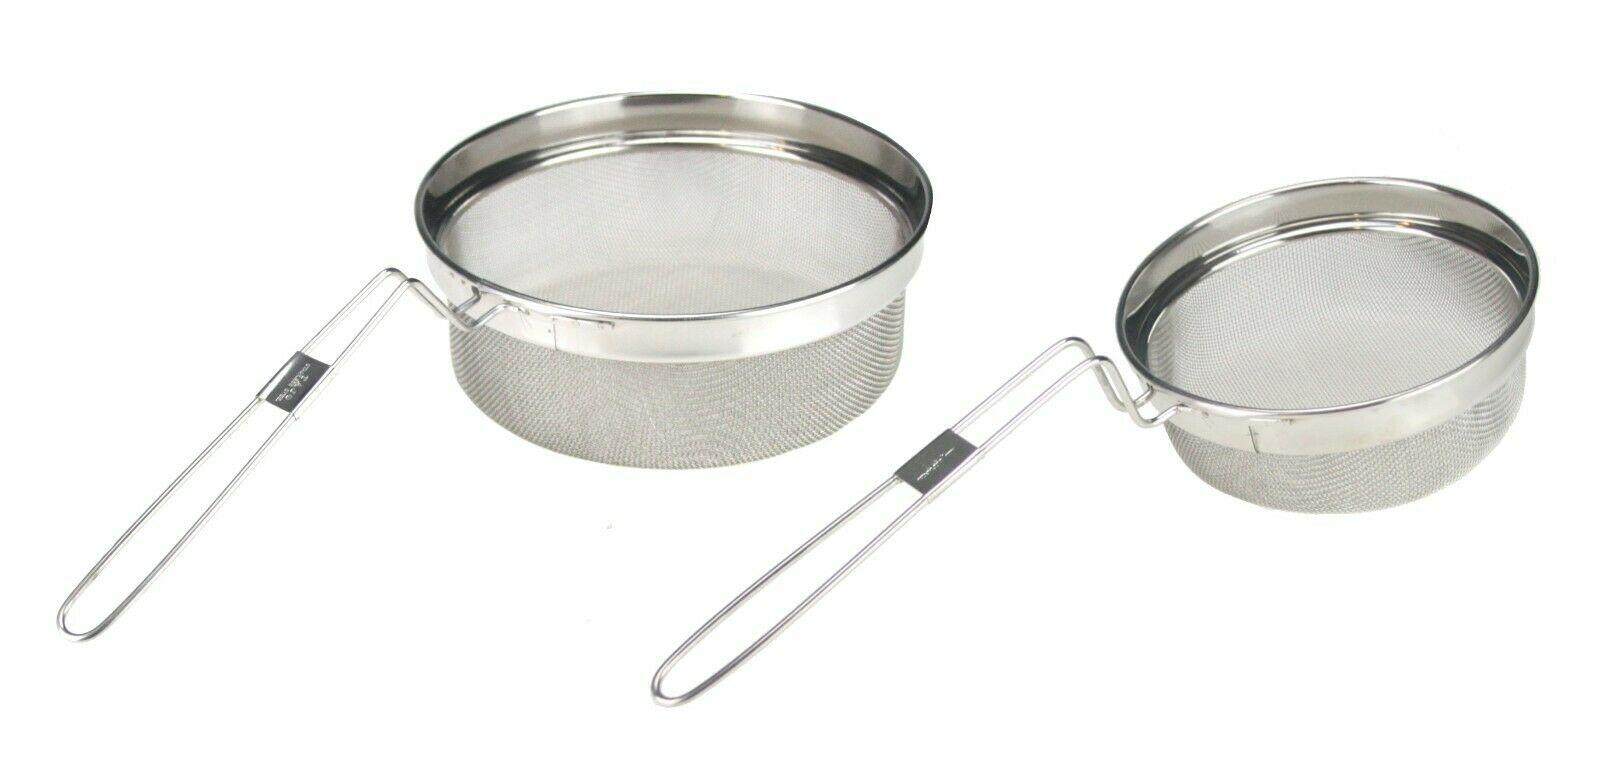 Stainless Steel Frying Basket Strainer Sieve Fine Mesh Deep Chip Fryer Basket with Bent Long Handle Heavy Duty Ideal for Frying Chips Onion Rings Falafel Noodles Straining Vegetables 